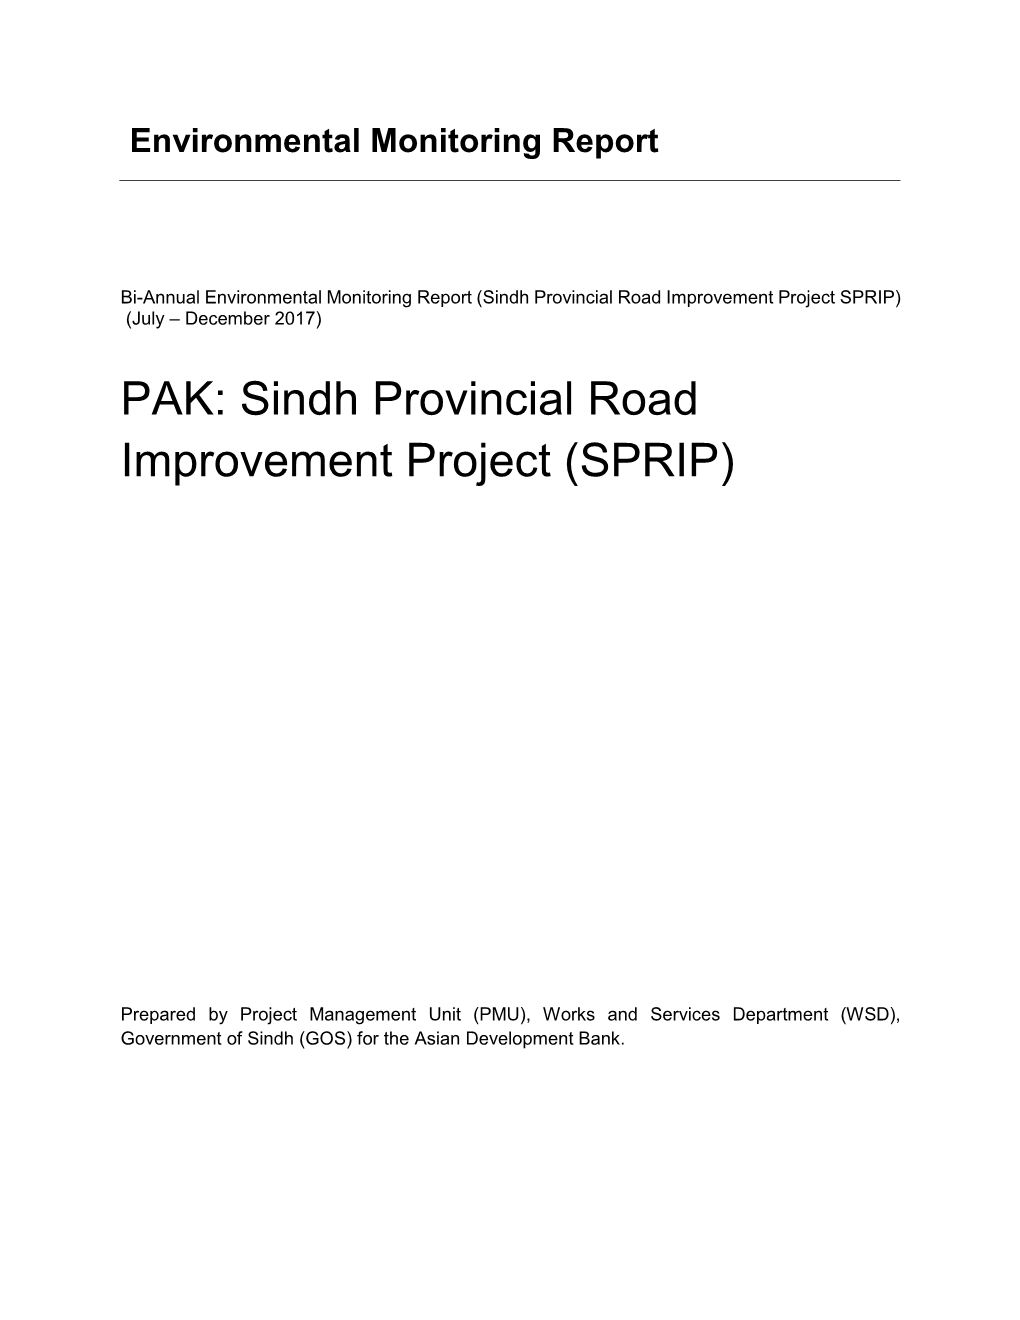 Sindh Provincial Road Improvement Project SPRIP) (July – December 2017)